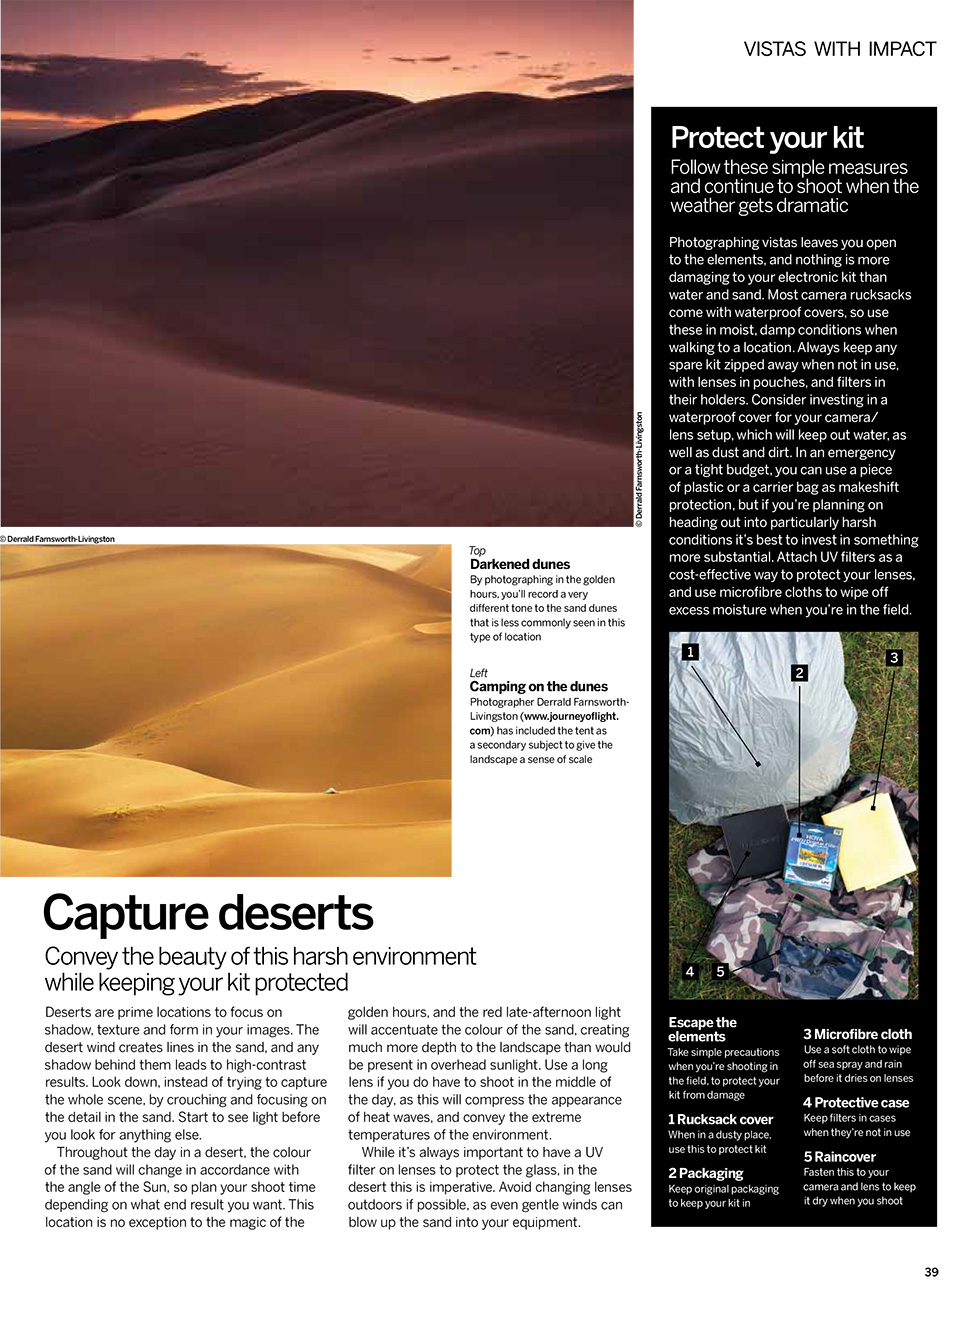 Vistas With Impact - Digital Photographer UK Article.  Contributed Photography (3 images). -  Picture